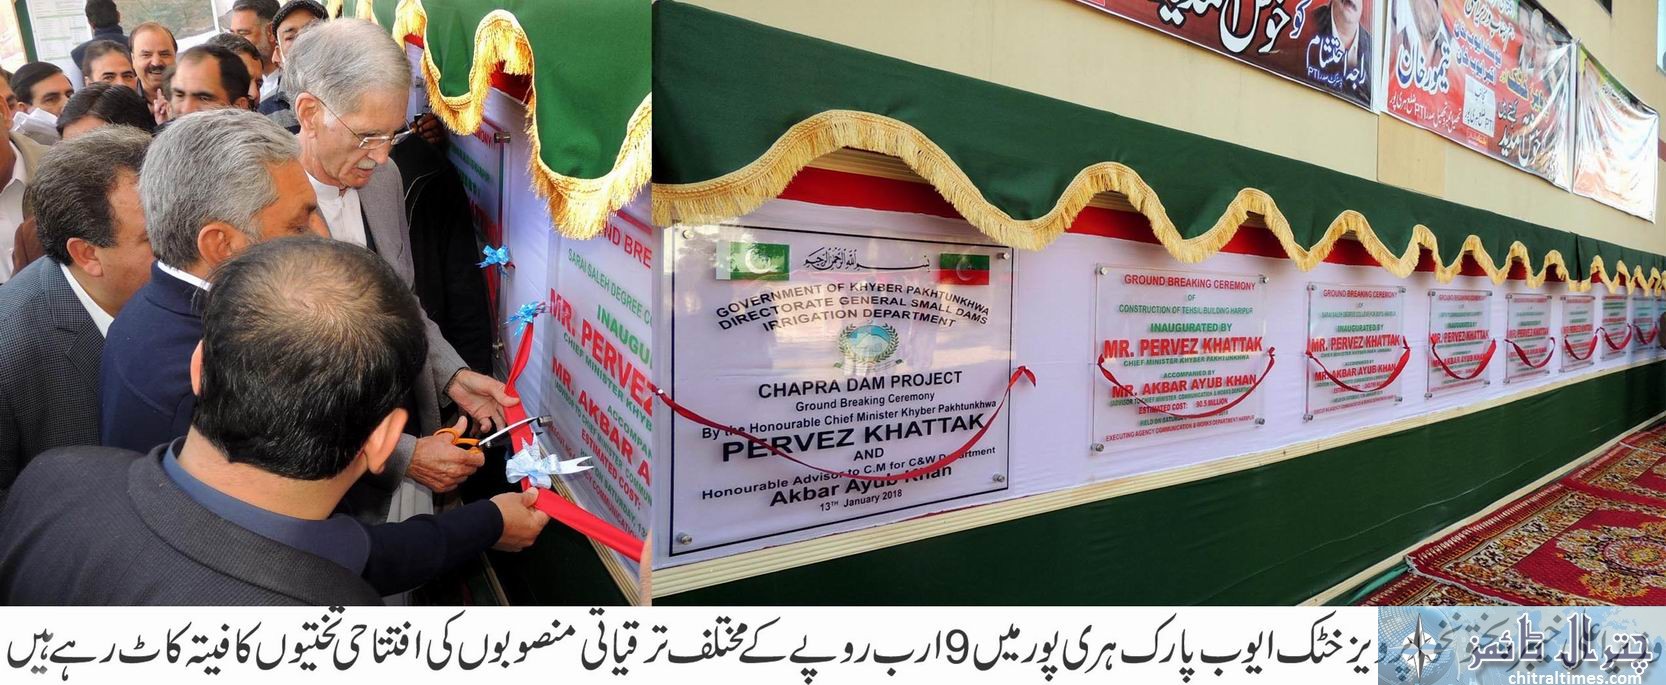 chief minister kpk inaugurating haripur project